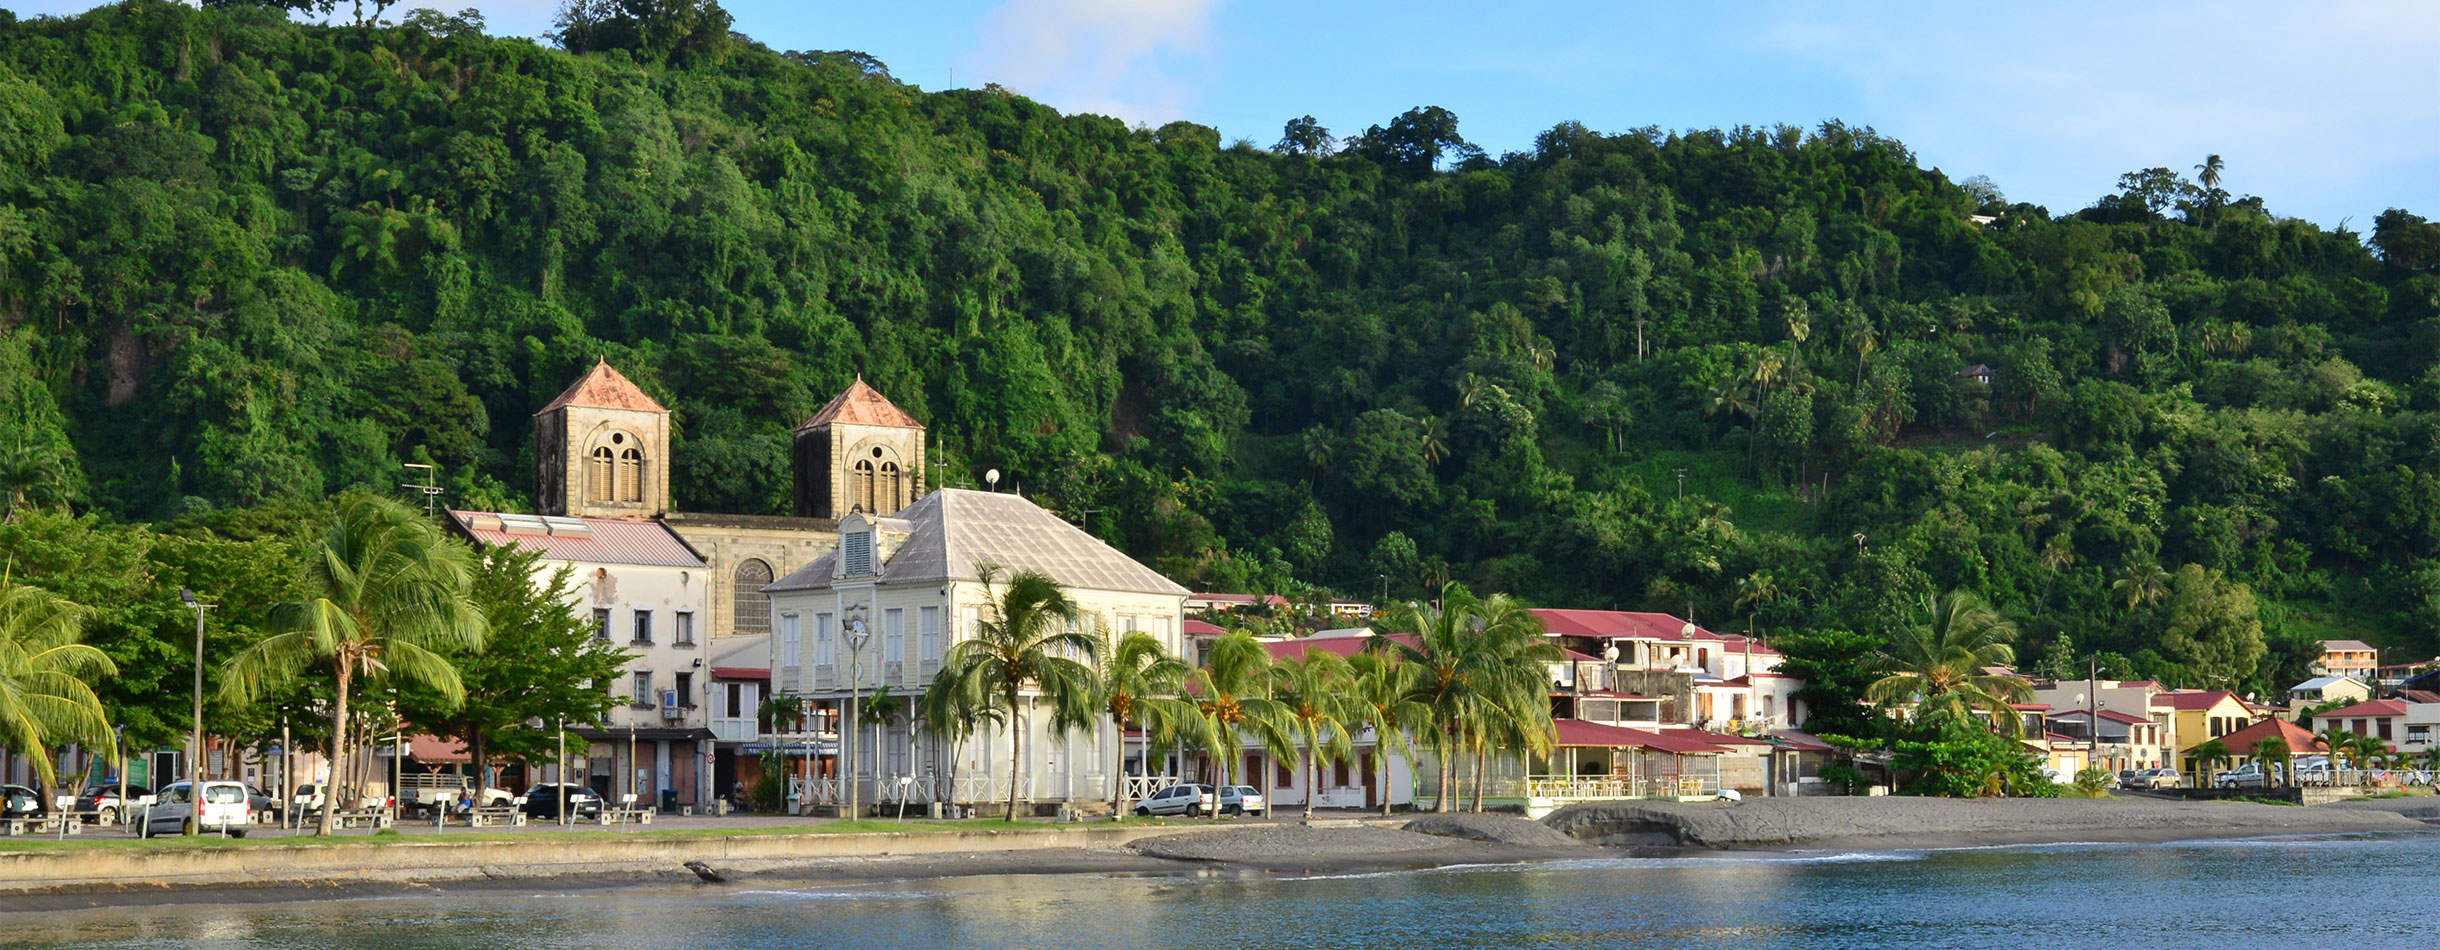 Martinique, the picturesque city of Fort de France in West Indies